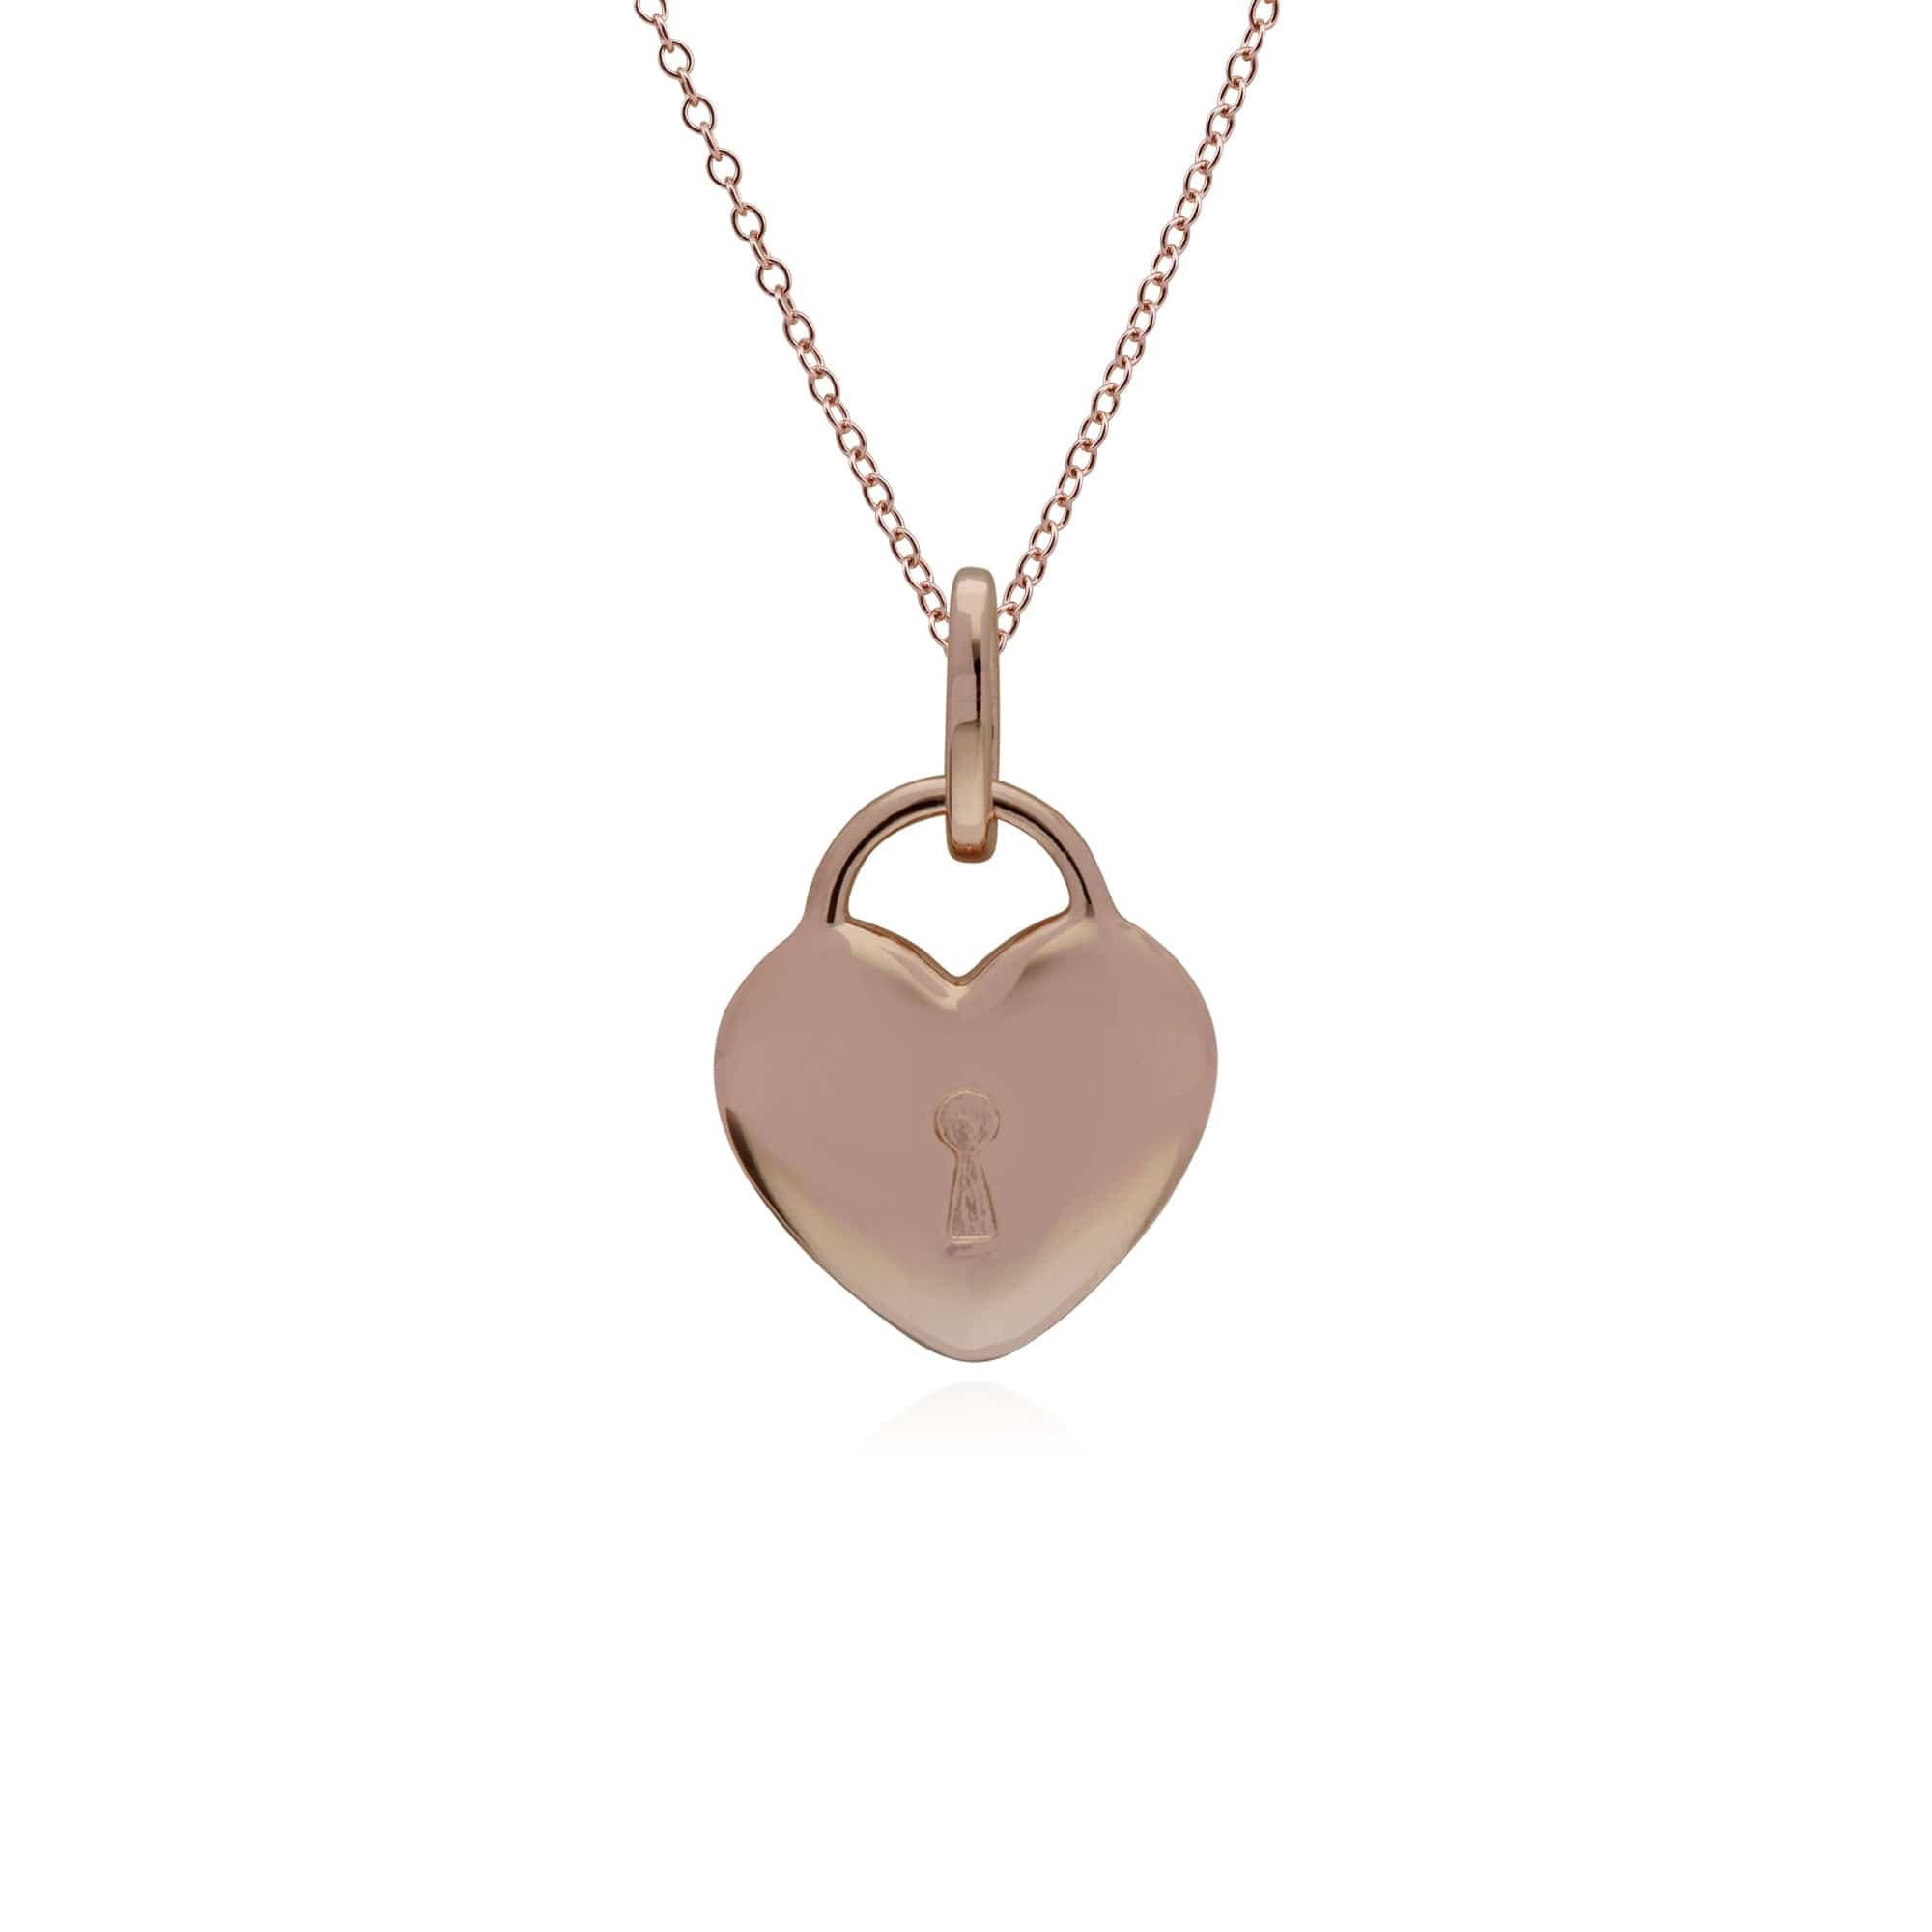 270P027310925-270P026901925 Classic Heart Lock Pendant & Sapphire Charm in Rose Gold Plated 925 Sterling Silver 3